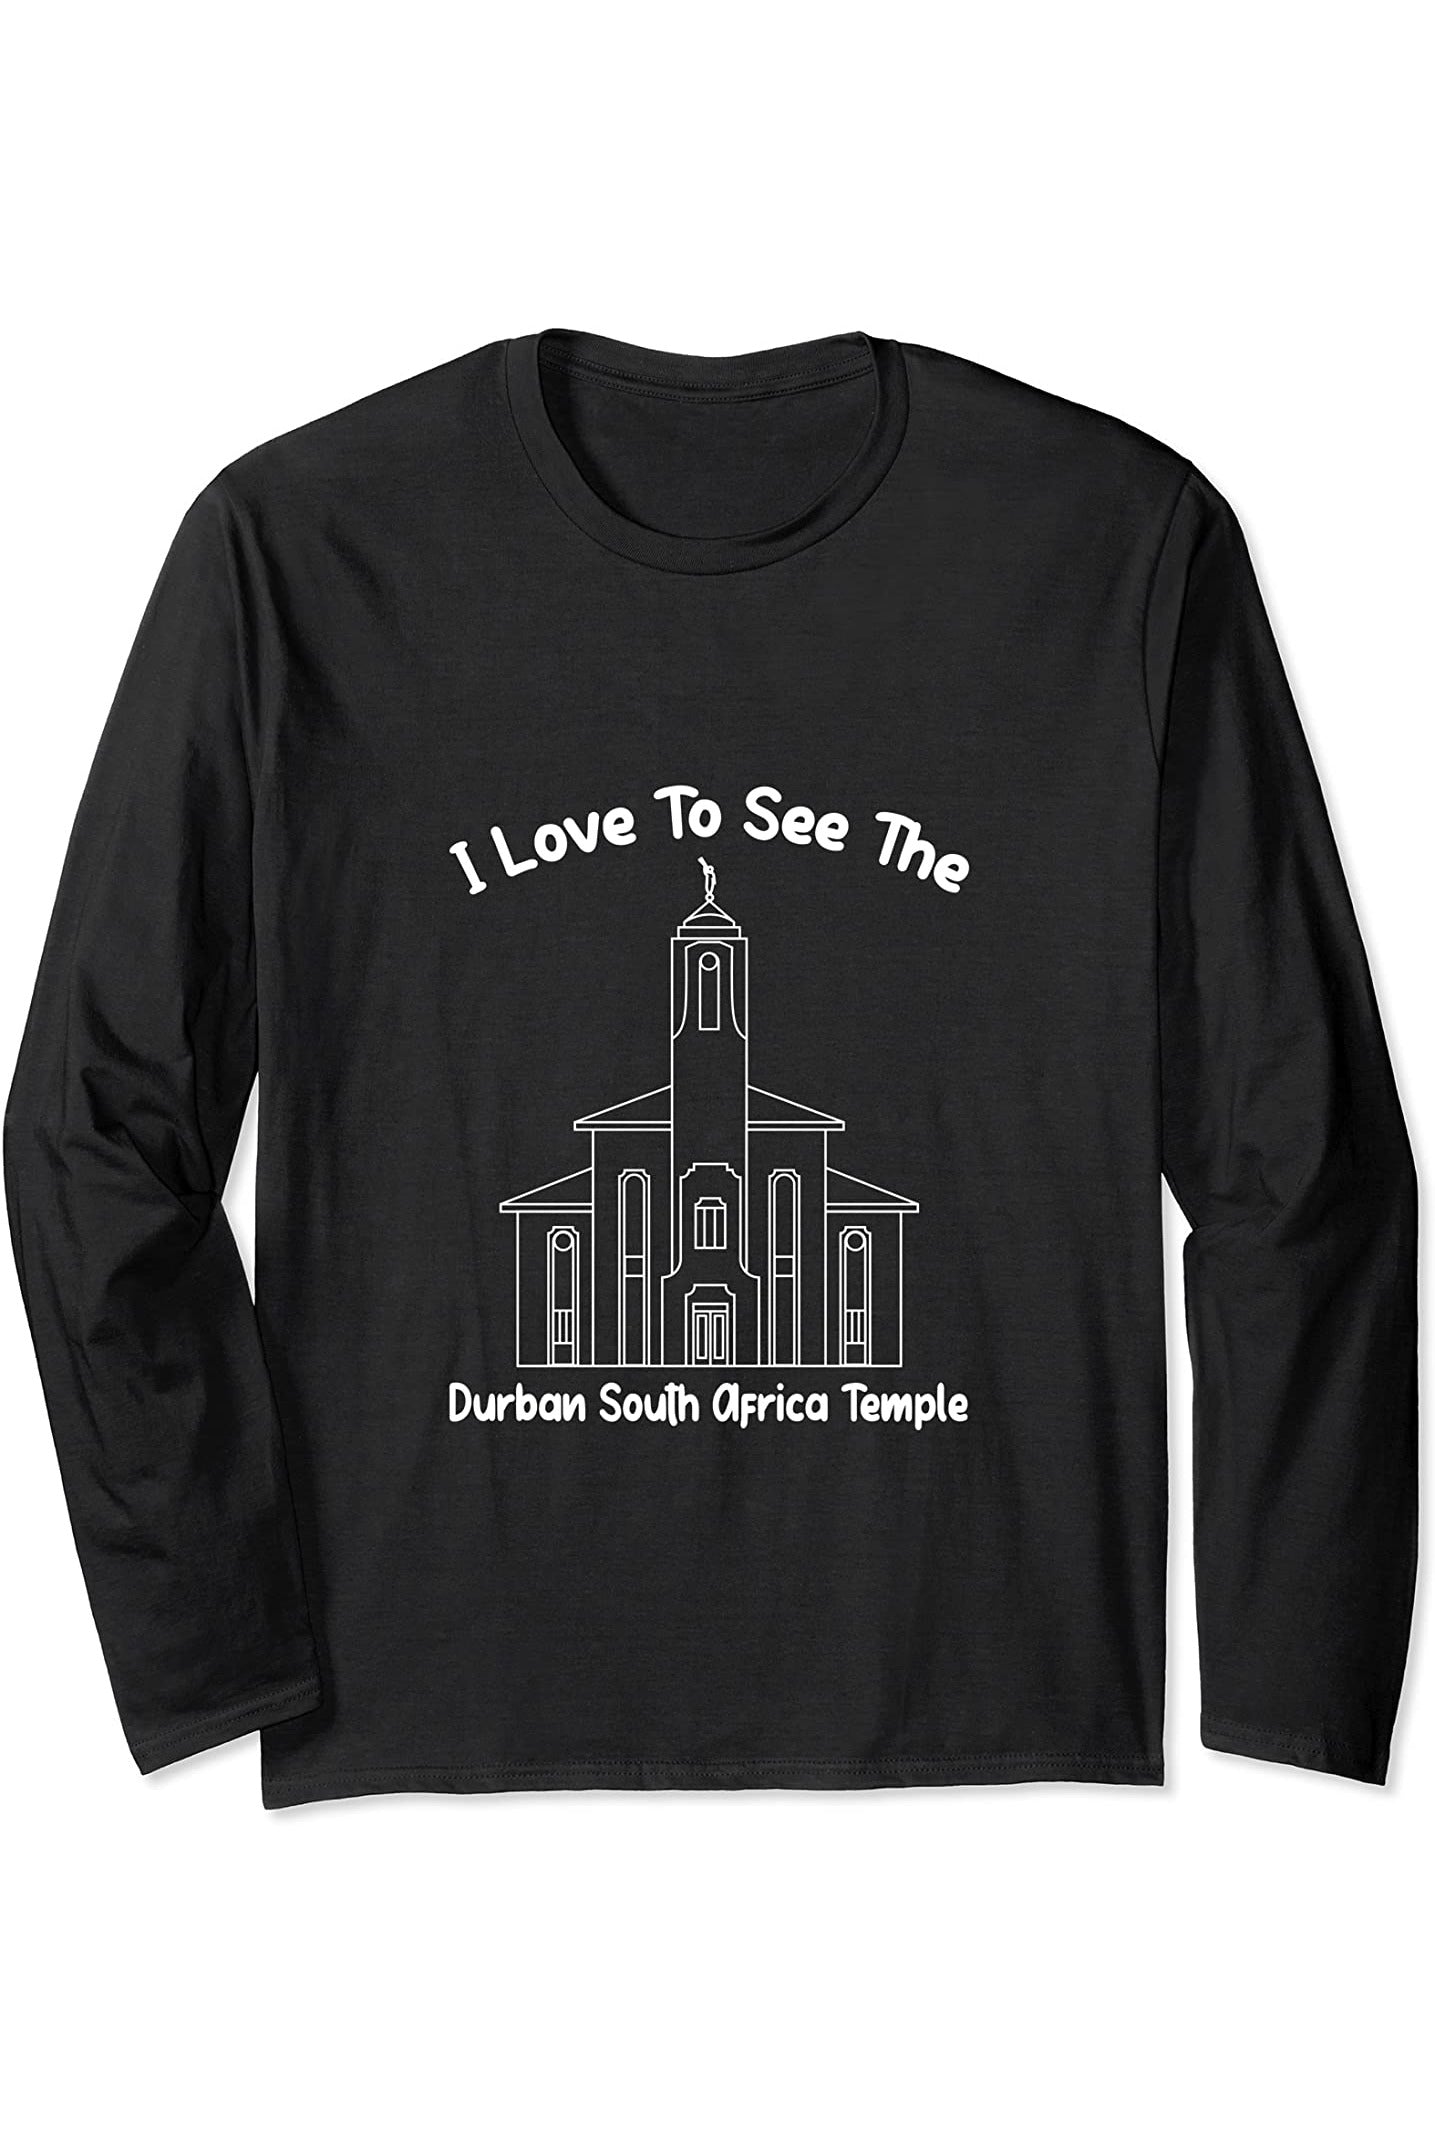 Durban South Africa Temple Long Sleeve T-Shirt - Primary Style (English) US